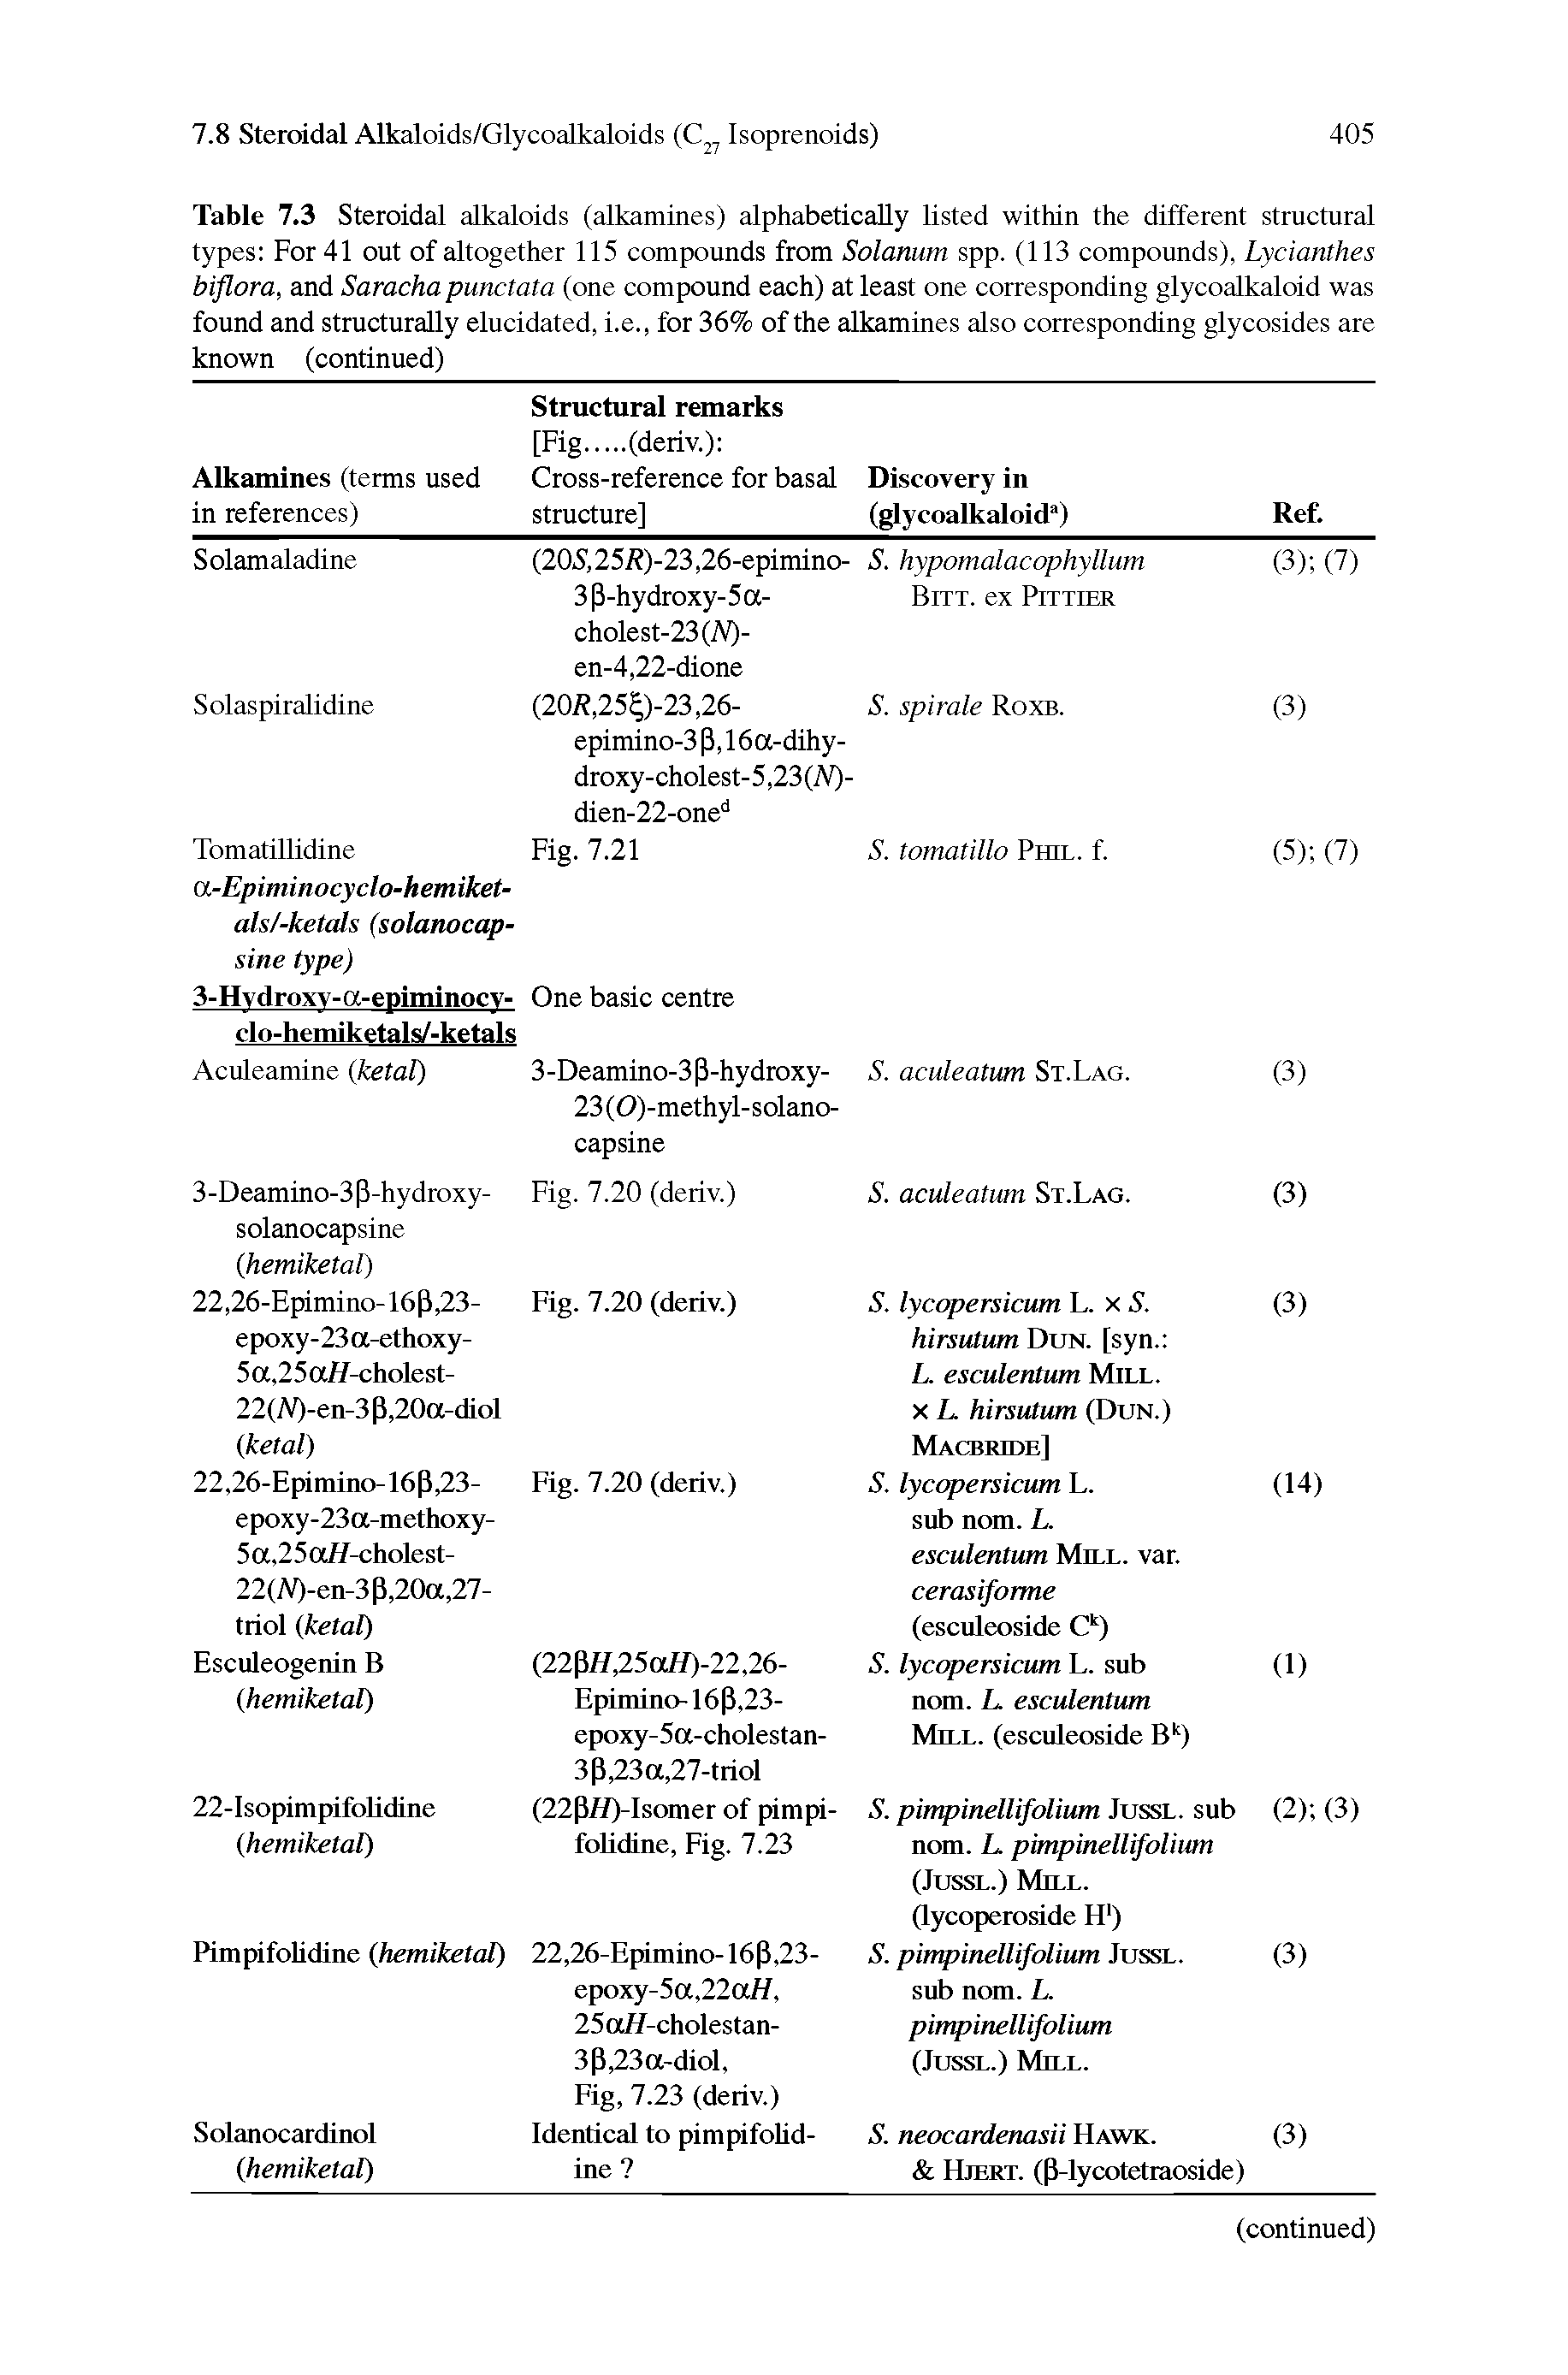 Table 7.3 Steroidal alkaloids (alkamines) alphabetically listed within the different structural types For 41 out of altogether 115 compounds from Solanum spp. (113 compounds), Lycianthes biflora, and Sarachapunctata (one compound each) at least one corresponding glycoalkaloid was found and structurally elucidated, i.e., for 36% of the alkamines also corresponding glycosides are known (continued)...